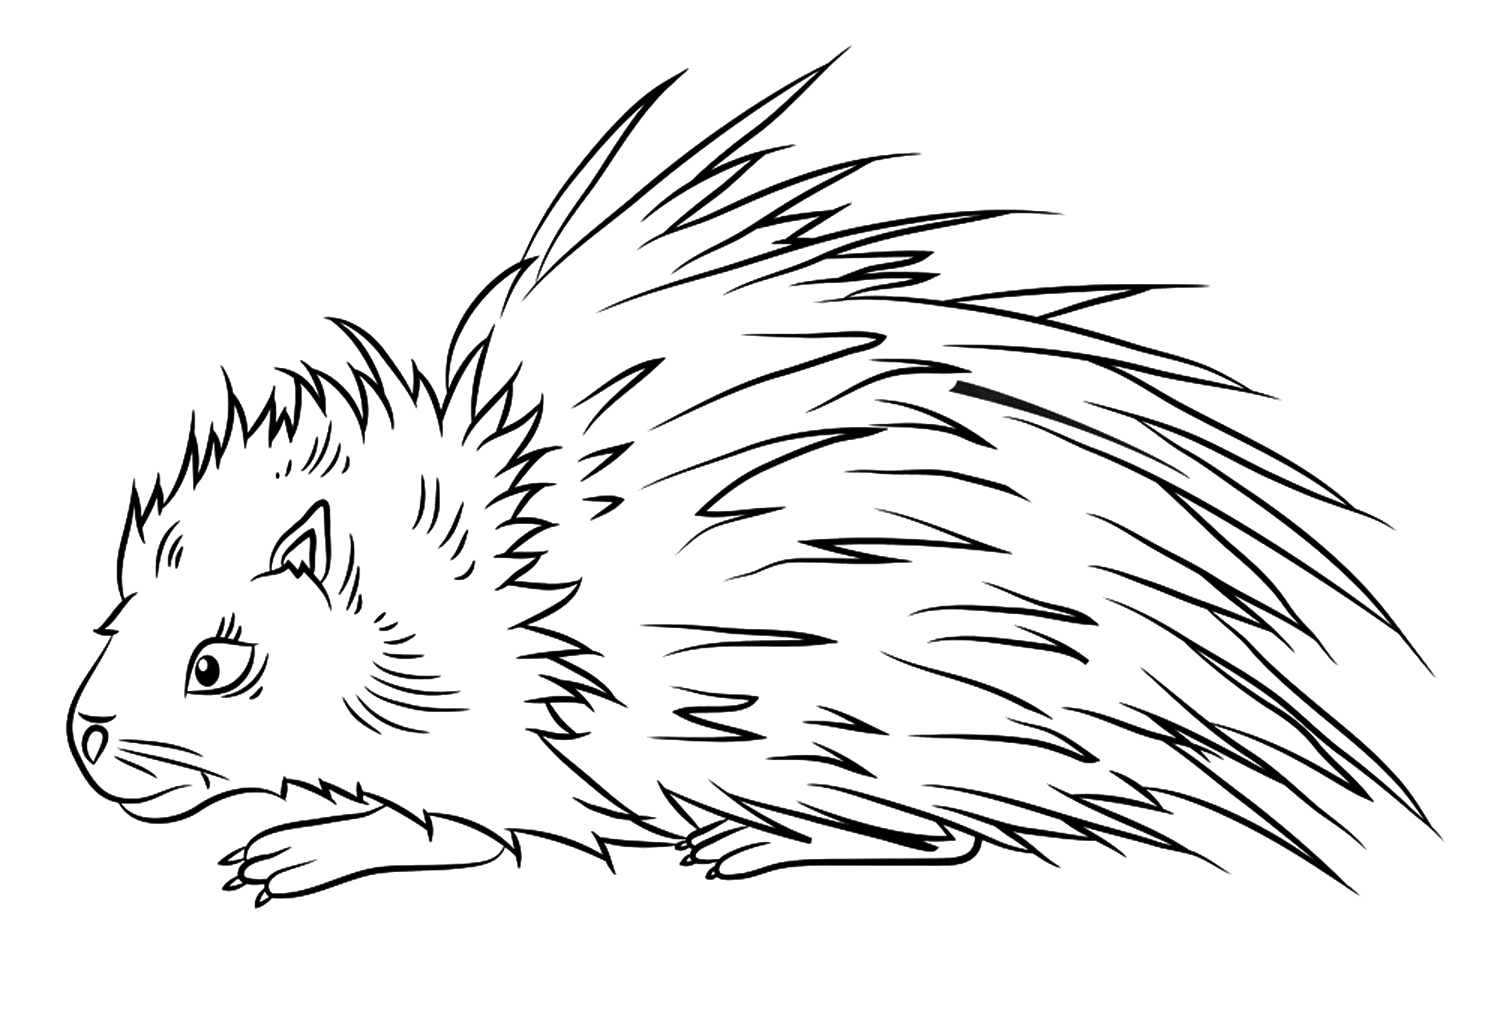 Porcupine Outline Picture To Color from Porcupine